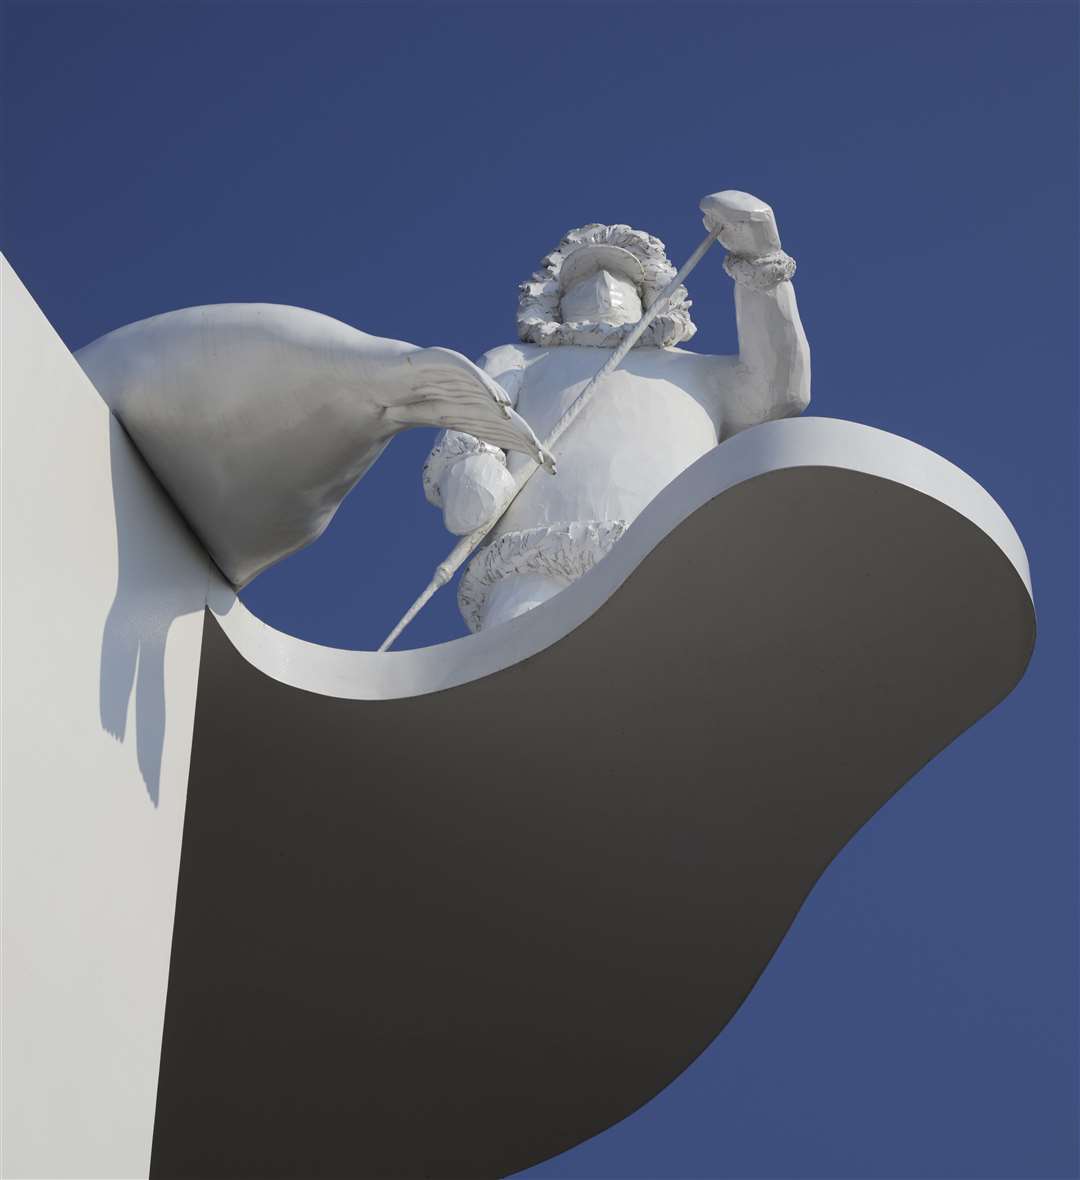 The Ledge by Bill Woodrow is one of the Folkestone Artworks